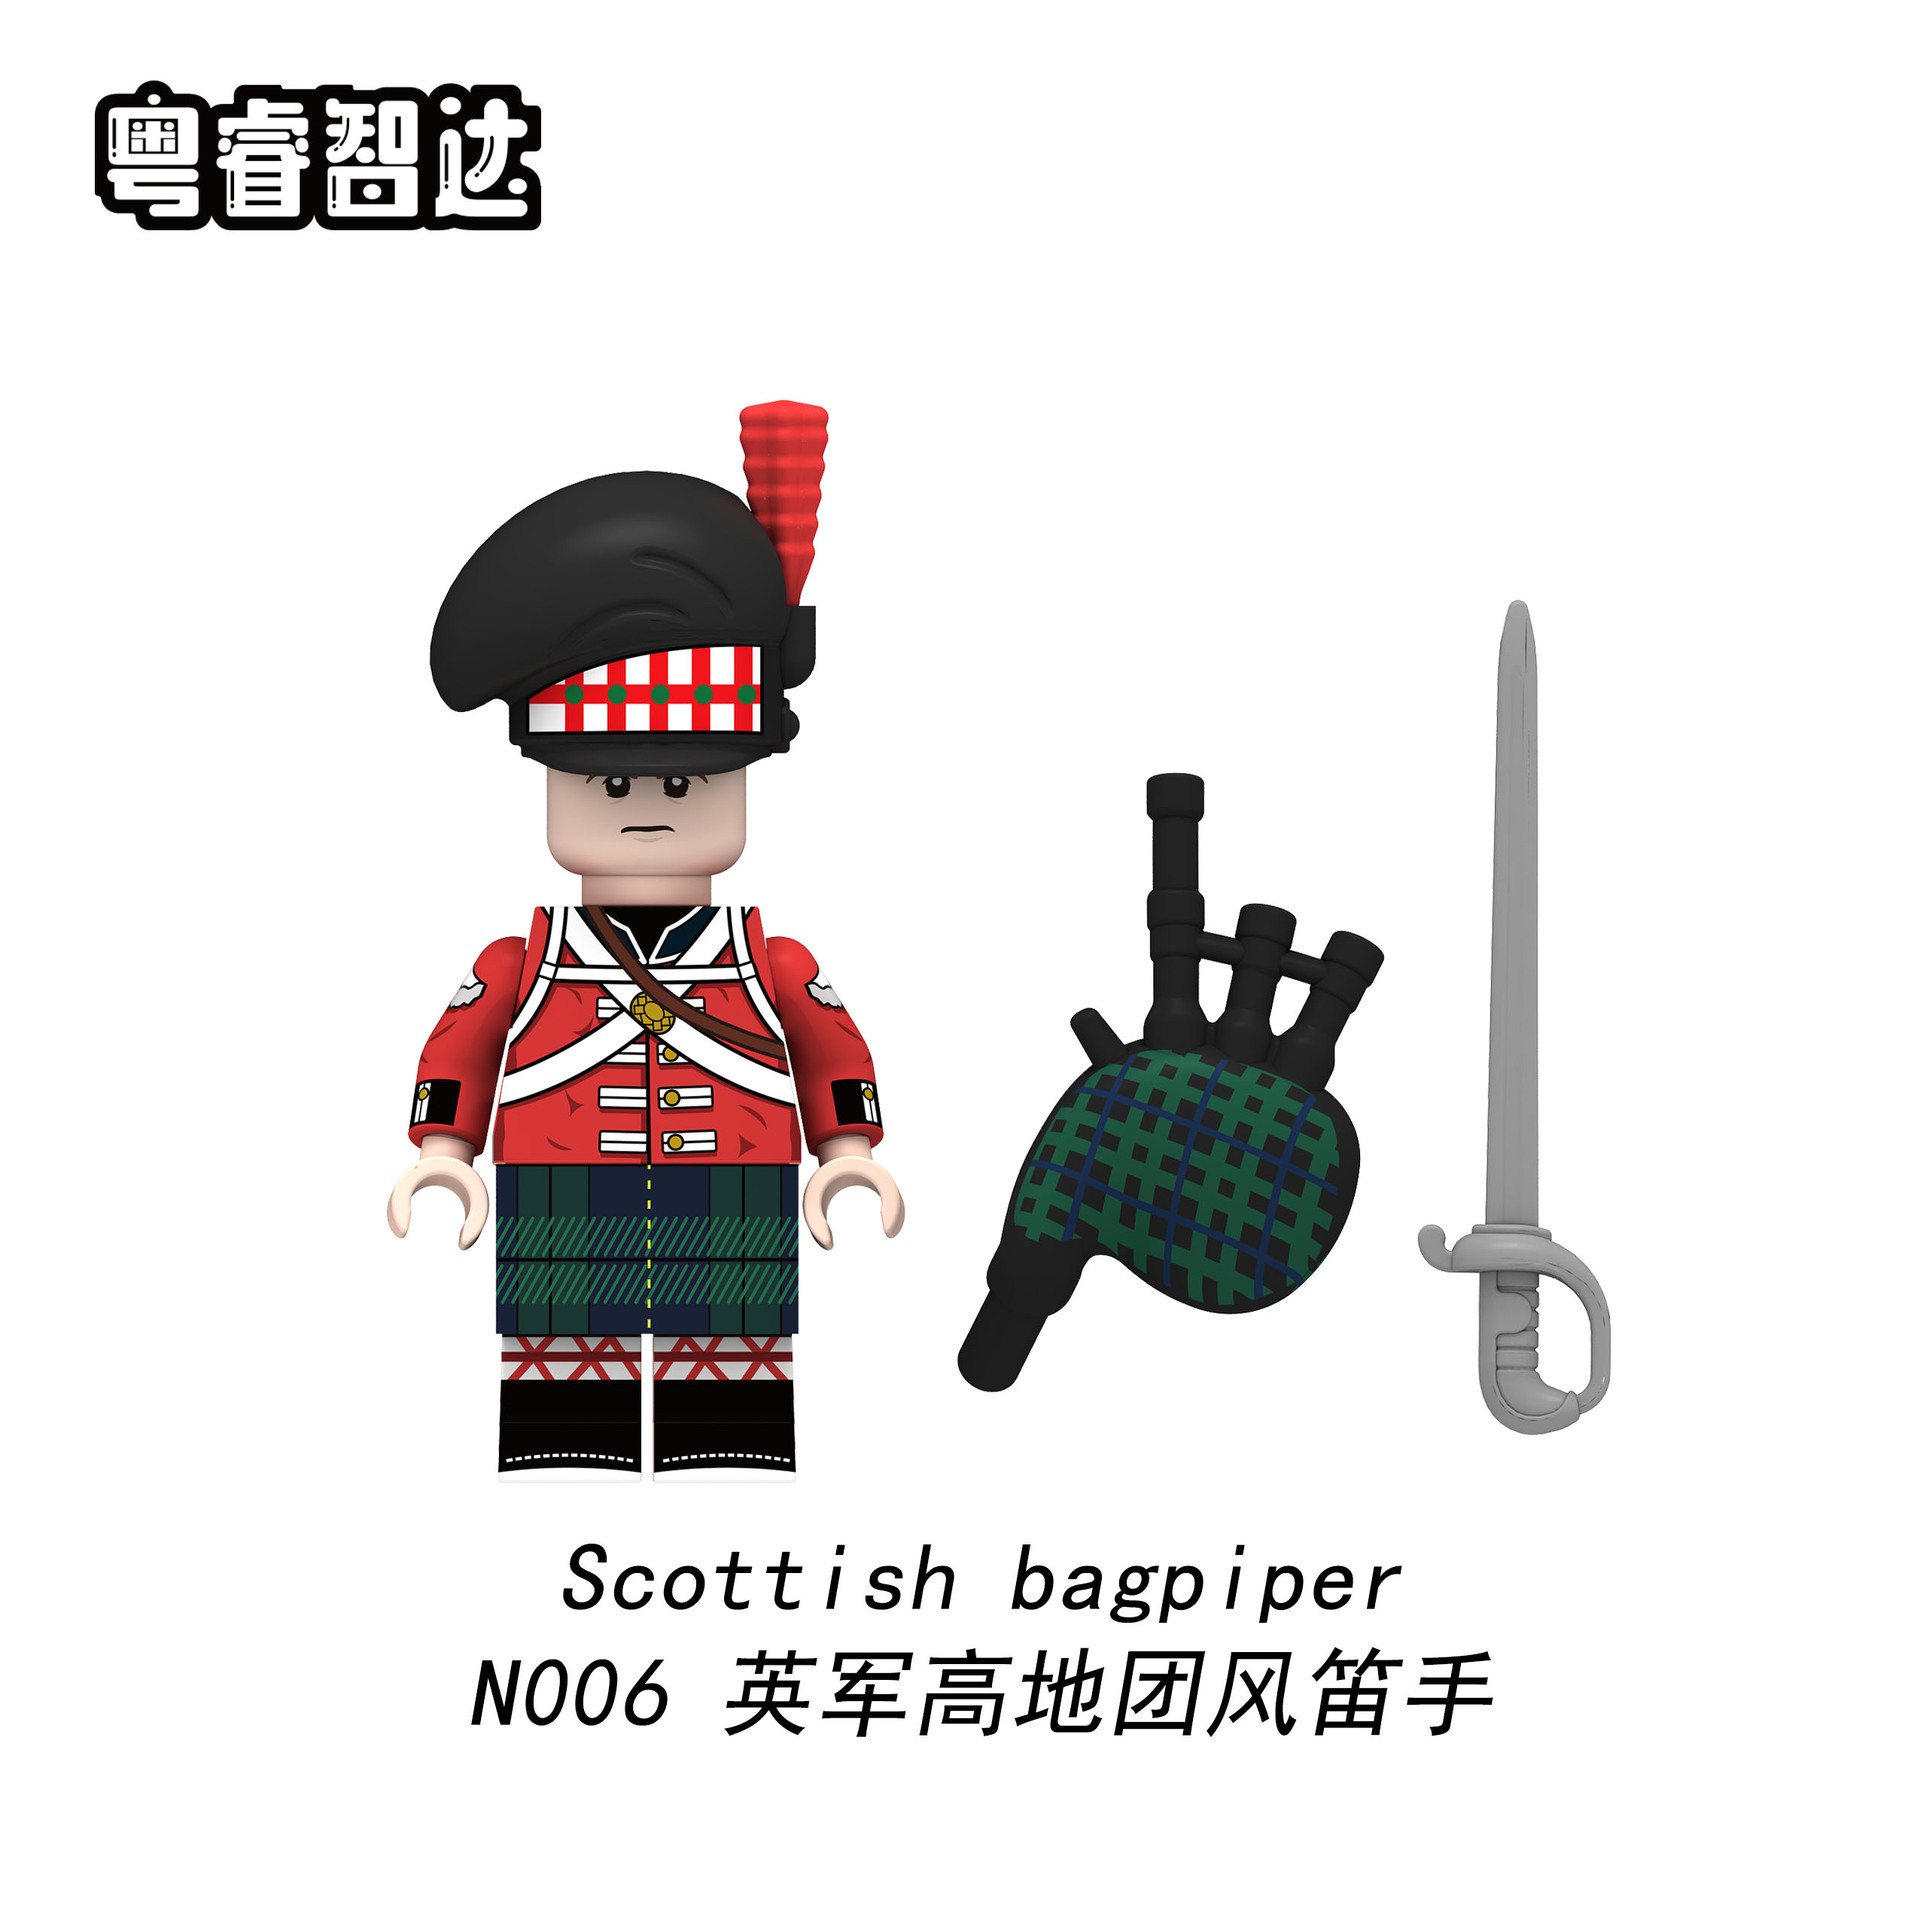 N001 N002 N003 N004 N005 N006 N007 N008 N009 N010 N011 N012 Soliders Series British Fusilier Scottish bagpiper 95th Rifles Building Blocks Action Figures Educational Toys For Kids Gifts